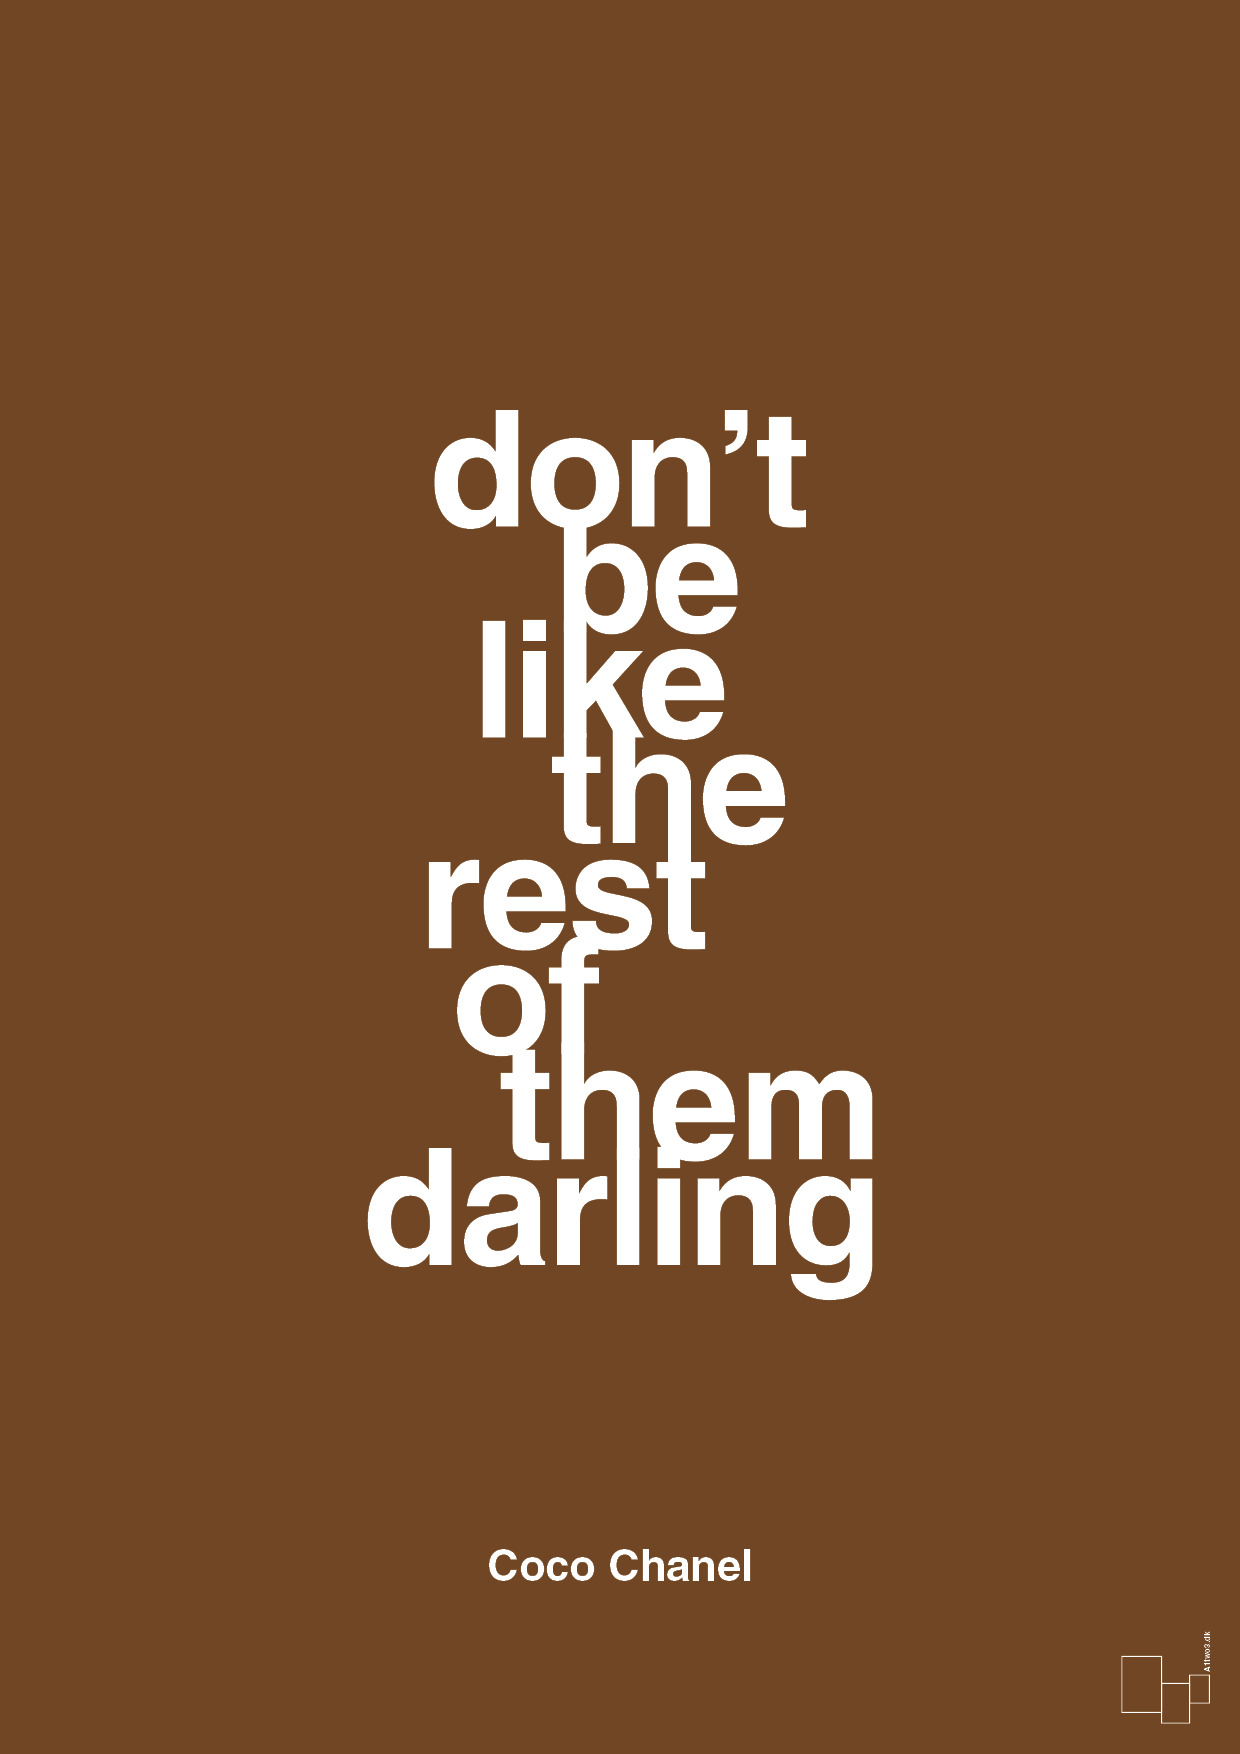 don’t be like the rest of them darling - Plakat med Citater i Dark Brown